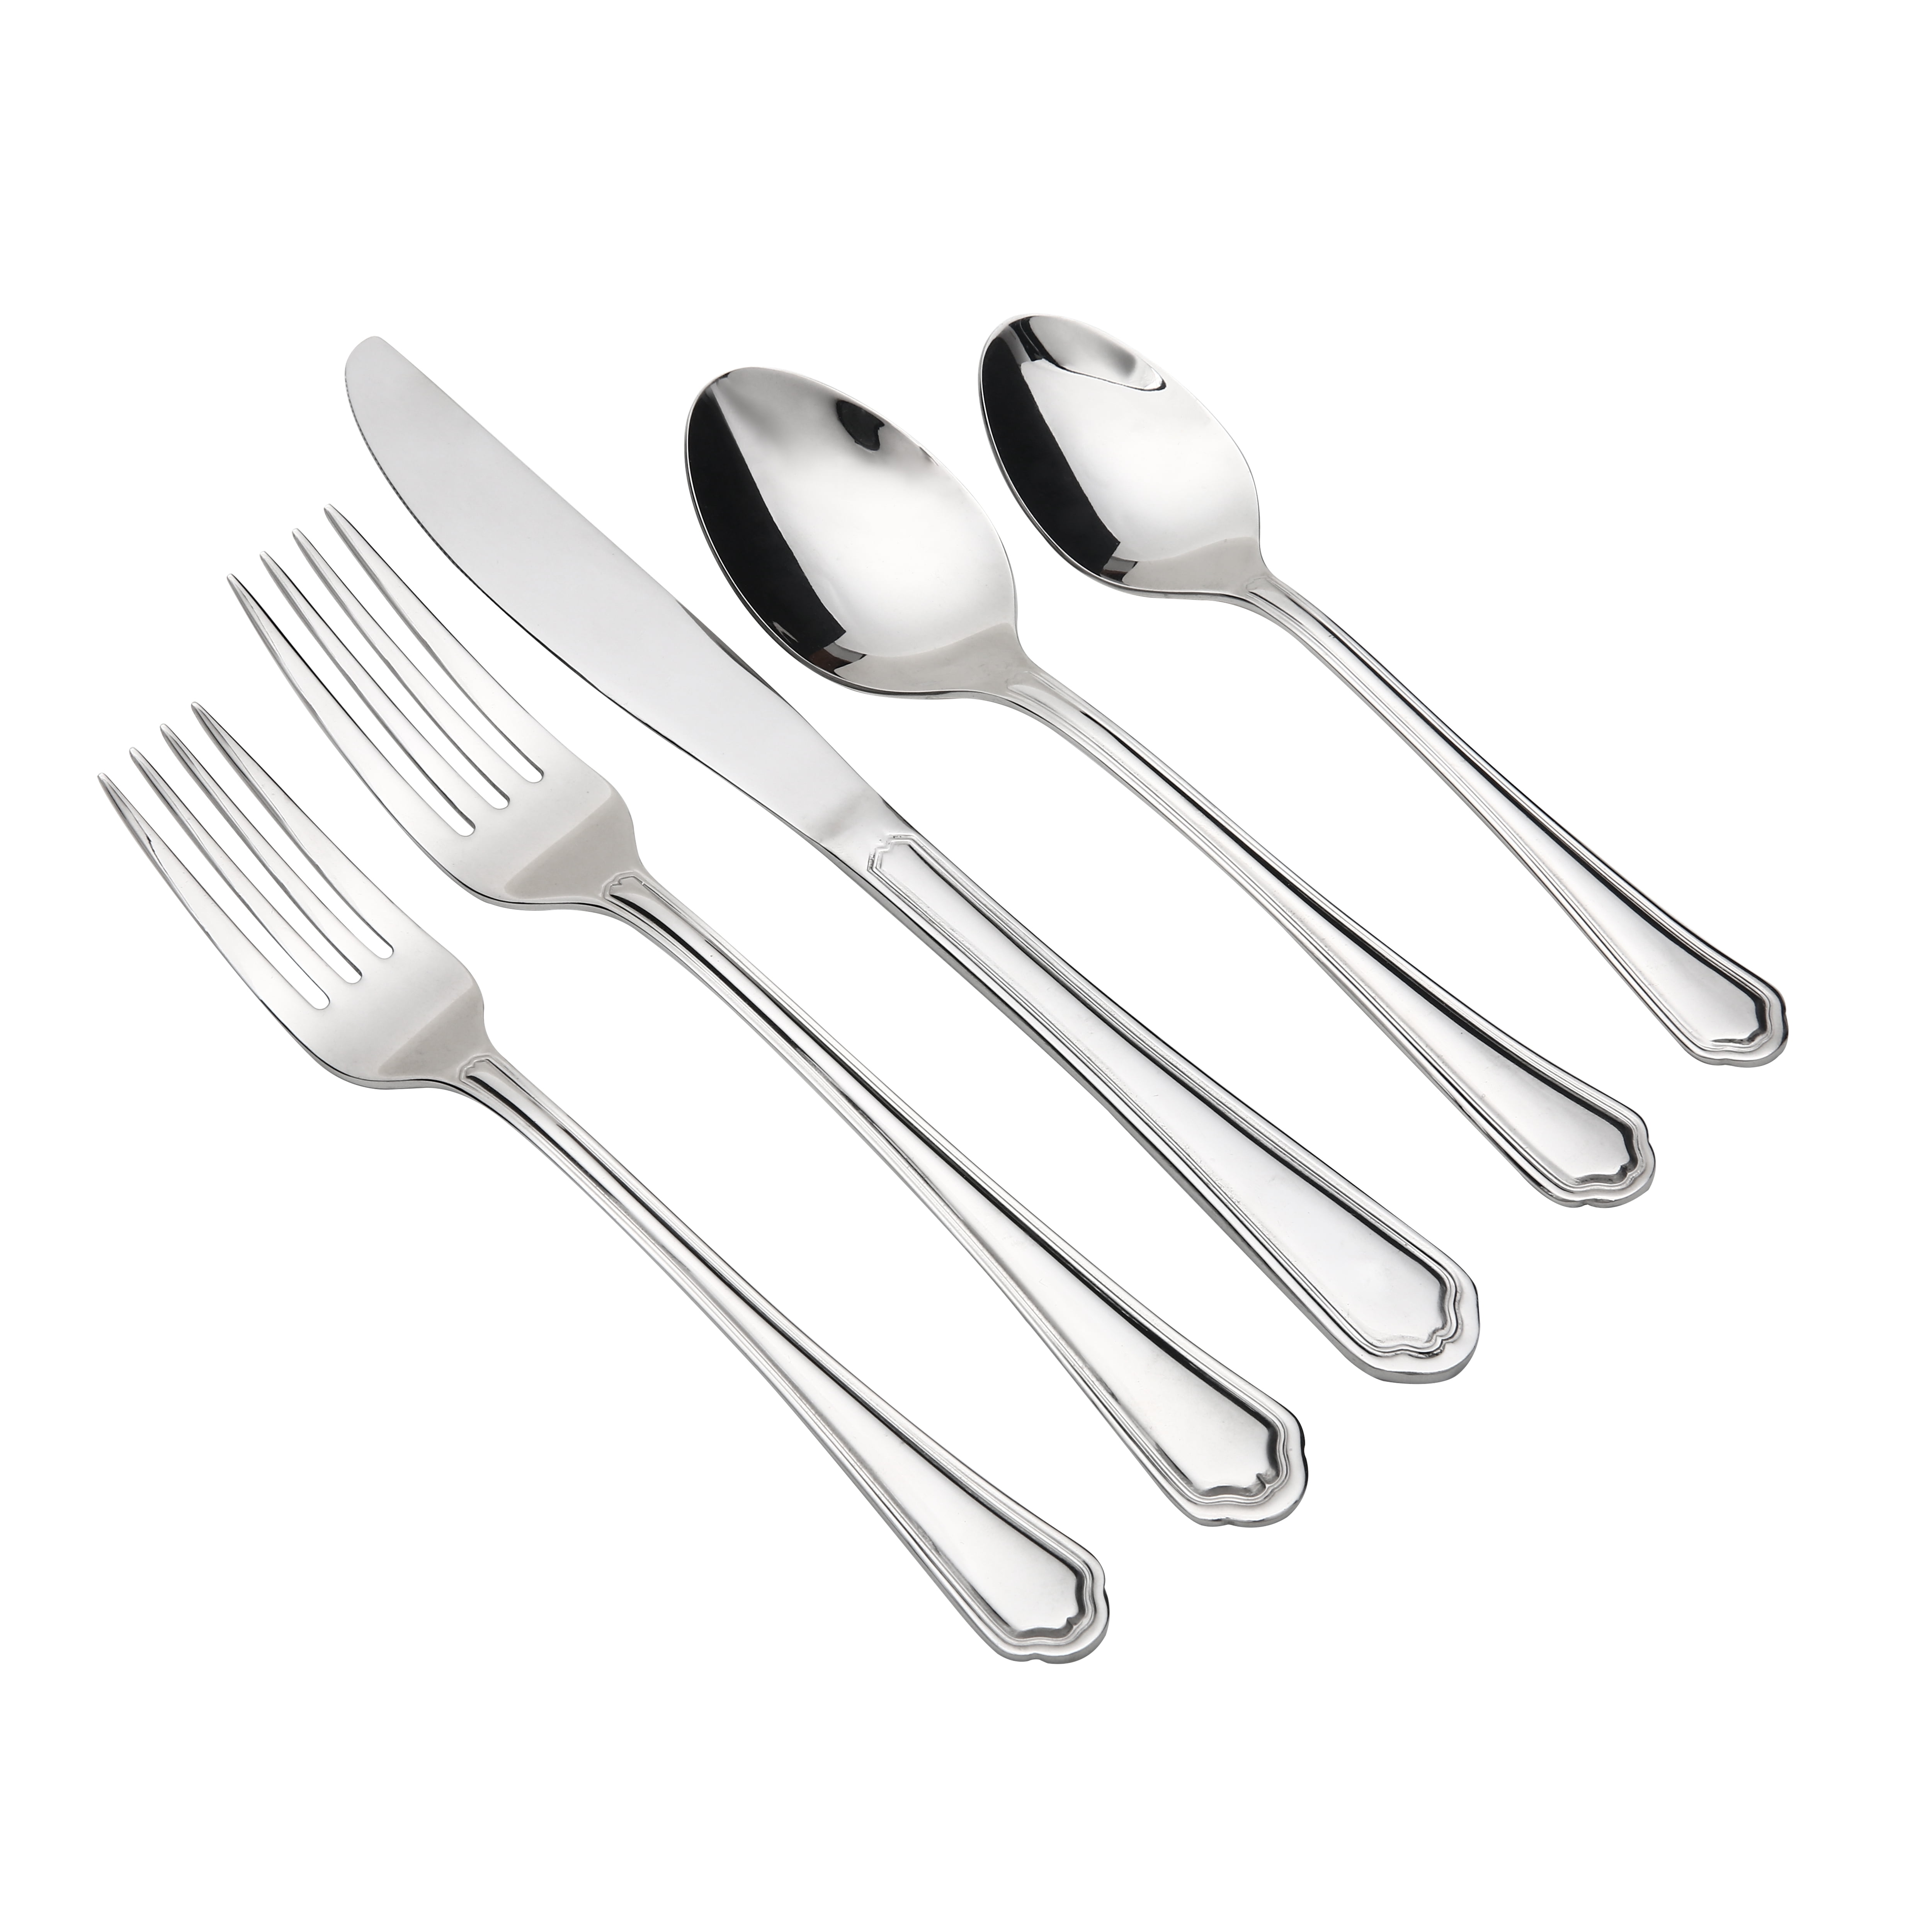 Details about   Farberware Europa 1 Salad Fork Stainless 27009 Bands Ridges China FRWEUR 18/8 